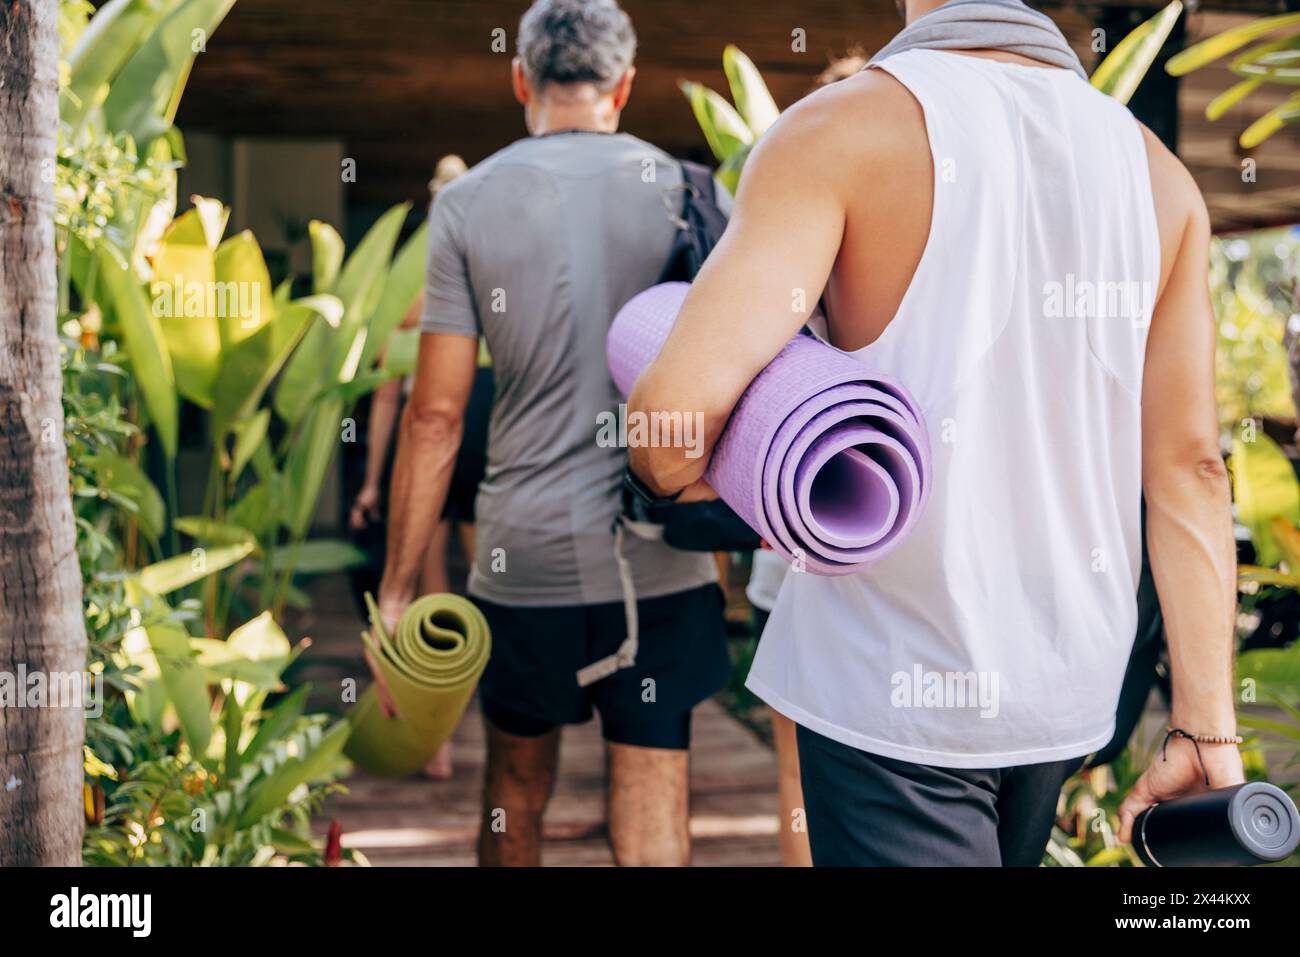 Rear view of men holding rolled up yoga mats while walking towards resort Stock Photo